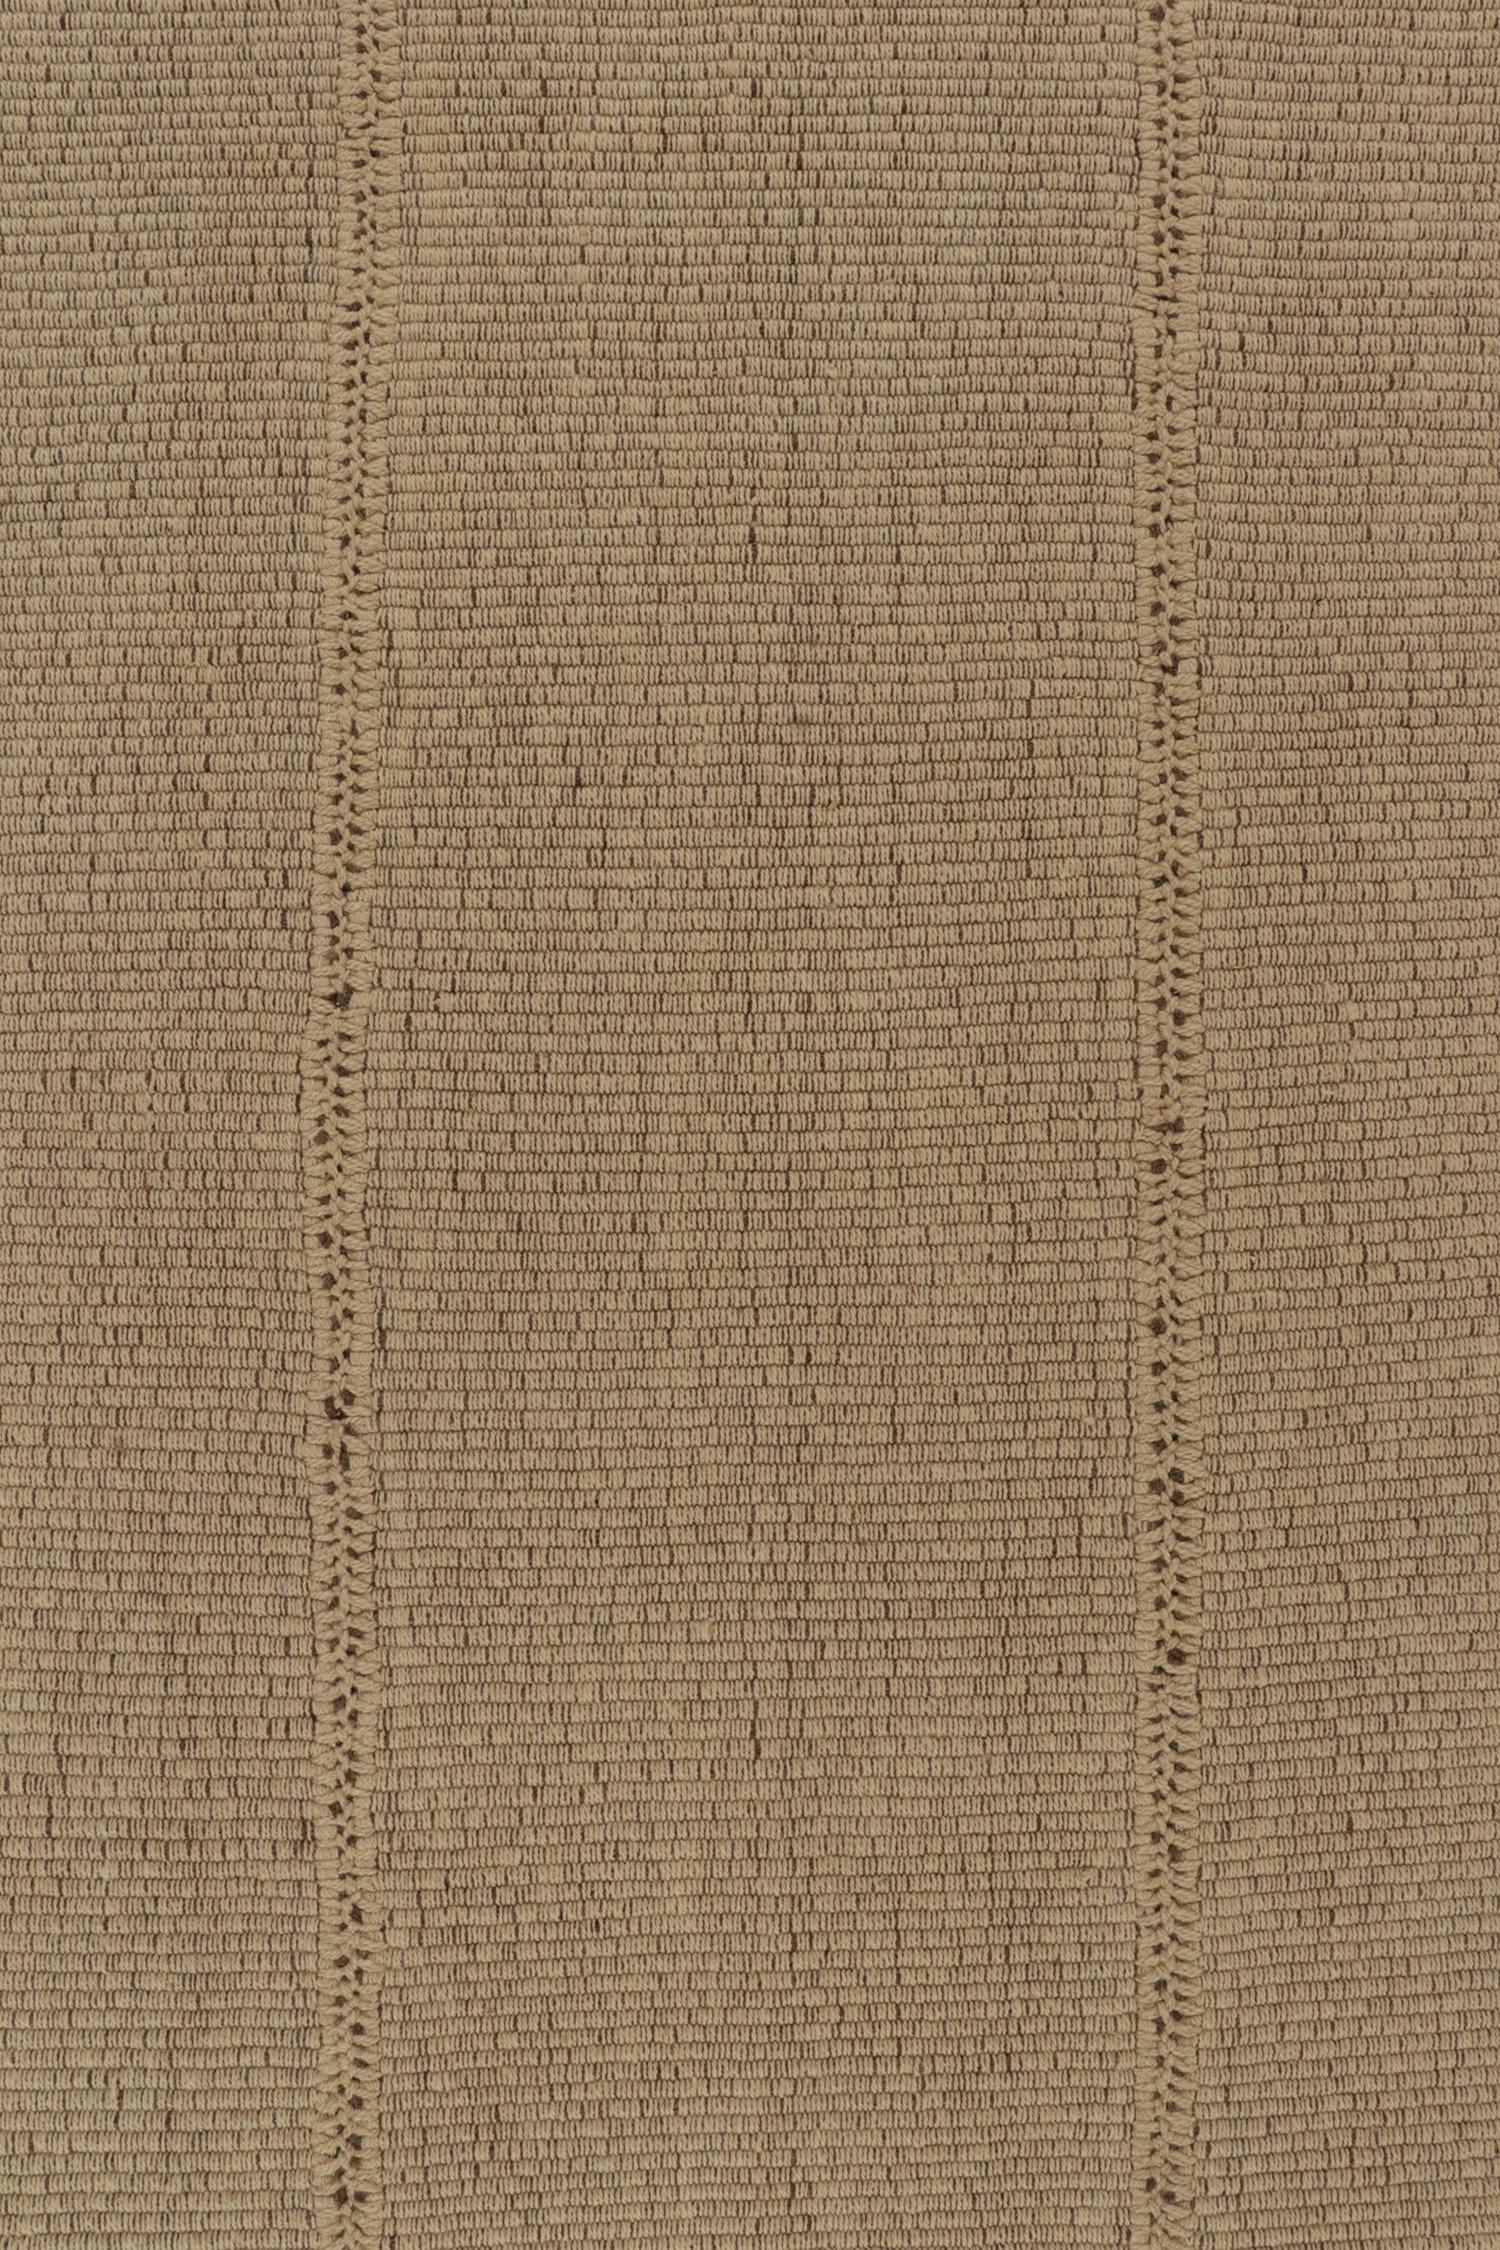 Wool Rug & Kilim’s Contemporary Kilim in Sandy, Solid Beige-Brown Panel Woven style For Sale